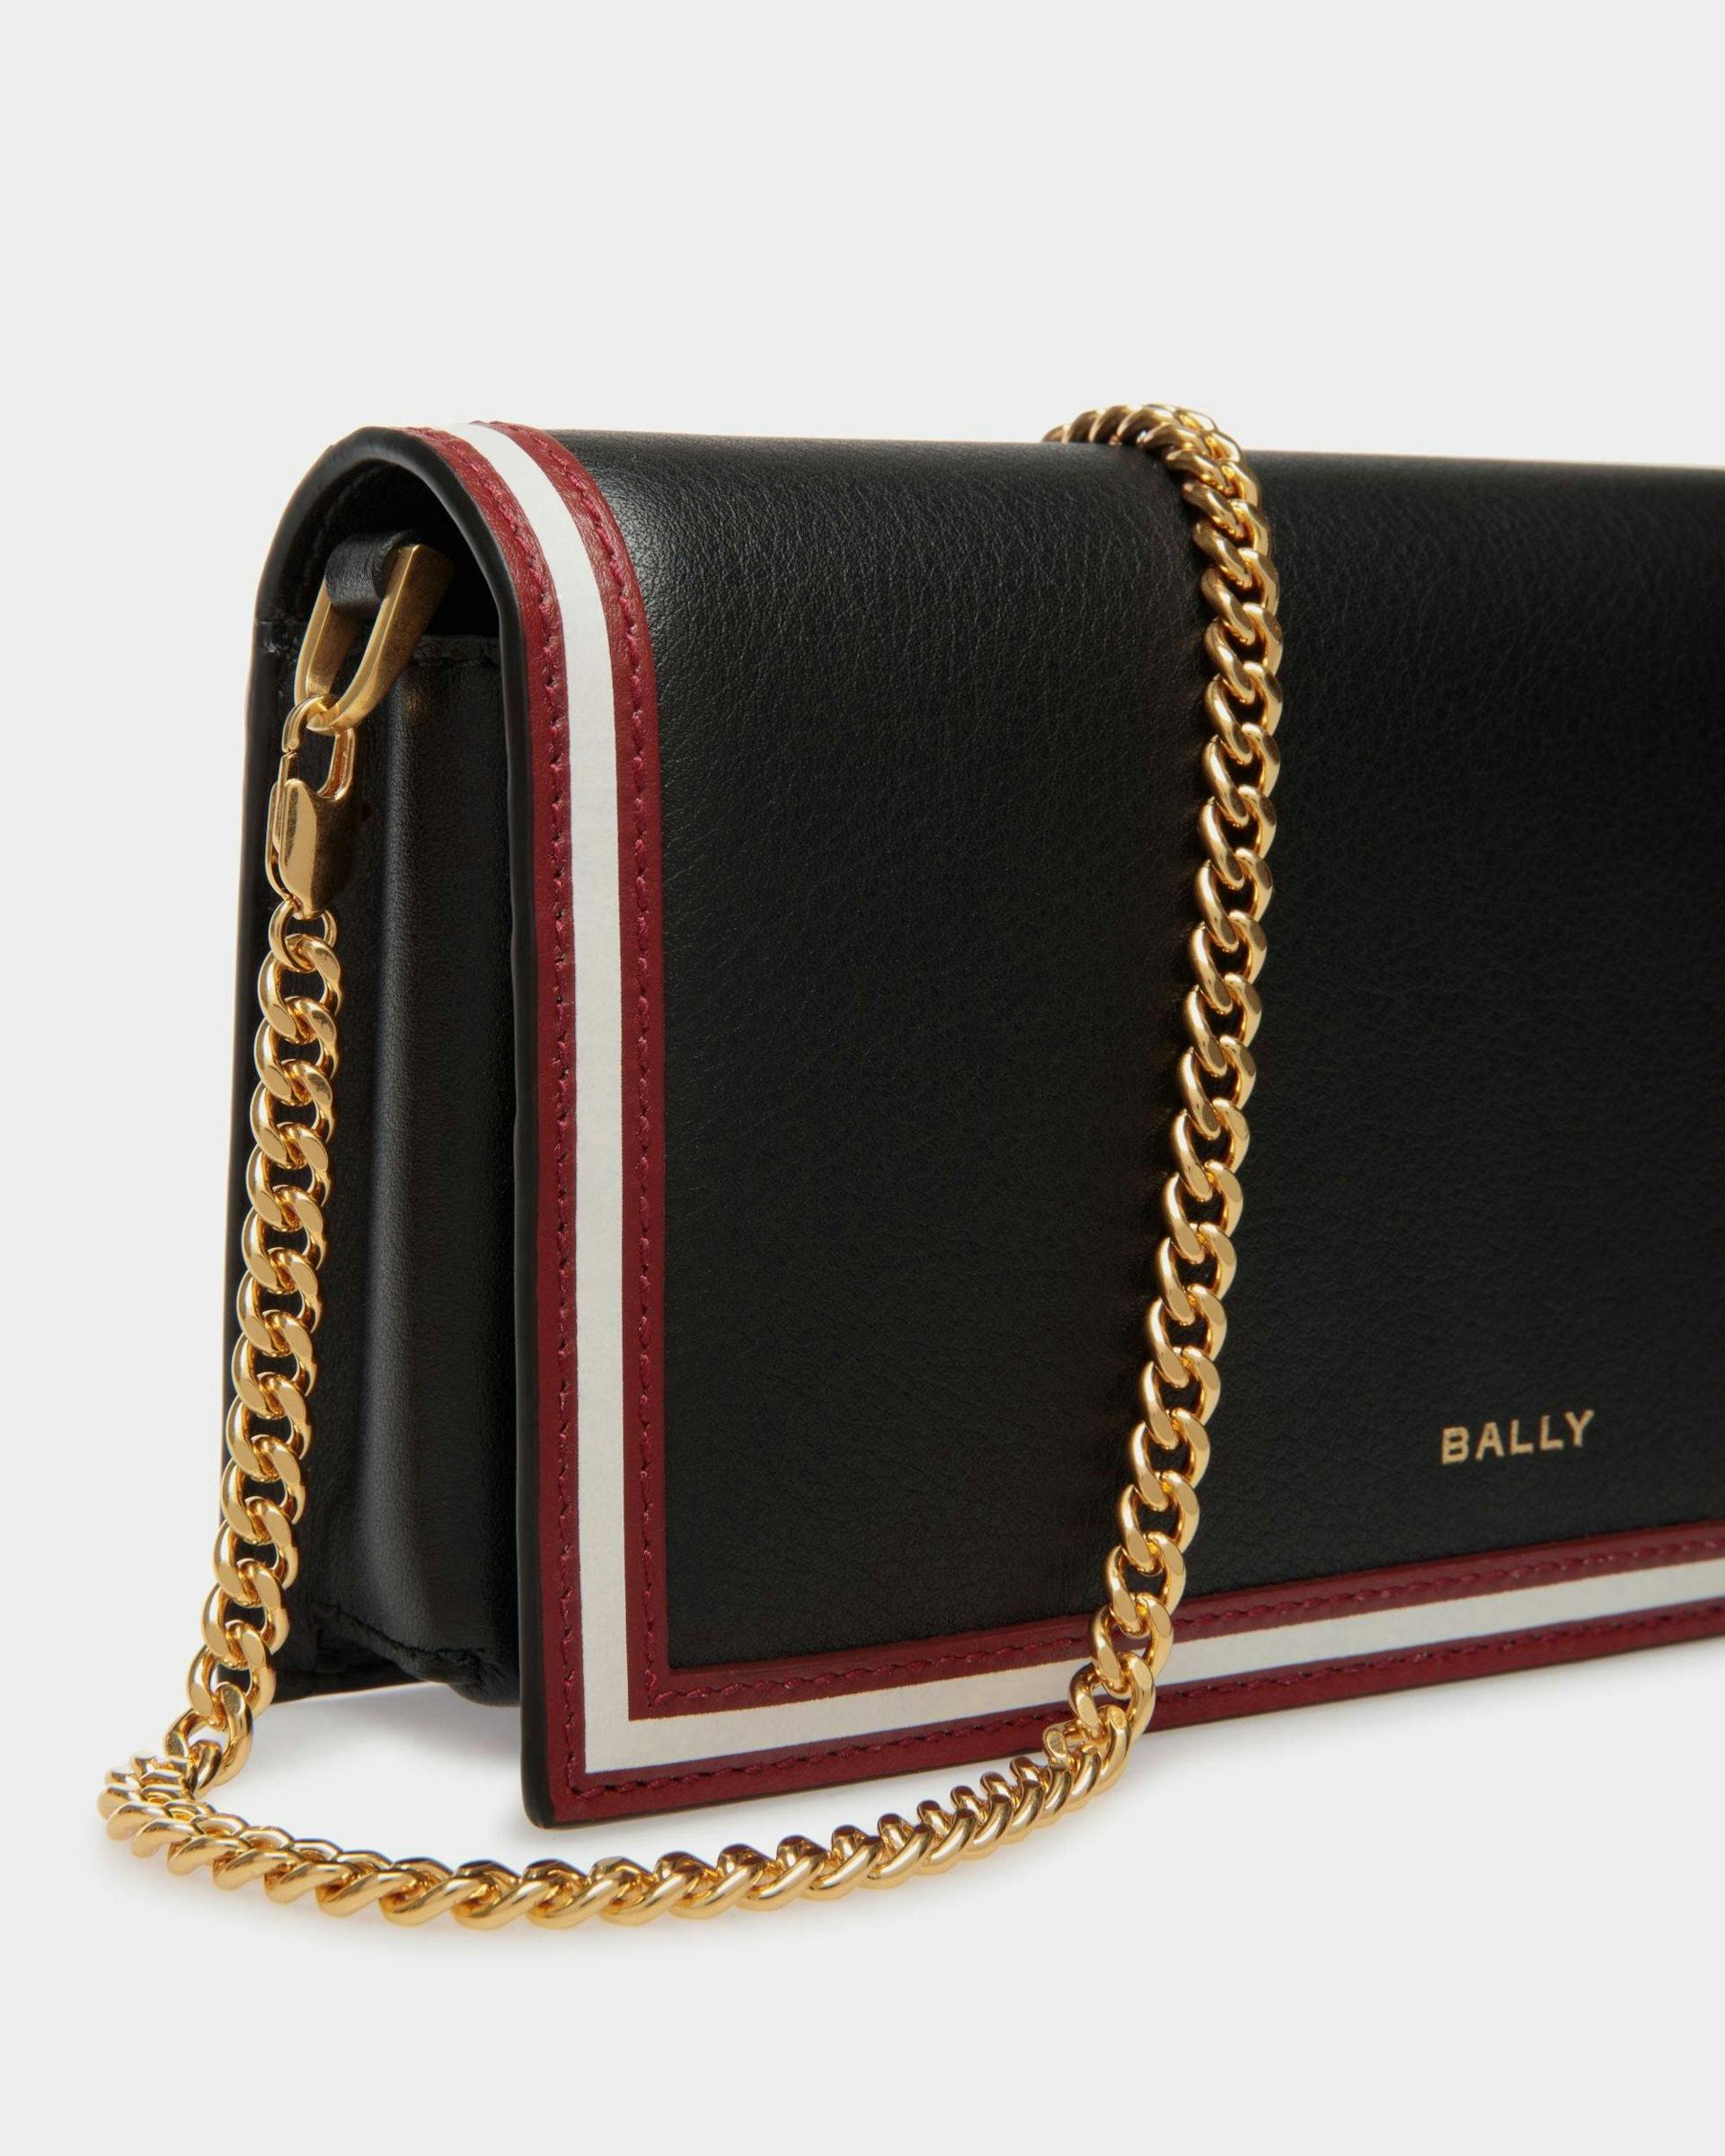 Women's Code Wallet on a Chain in Black Leather | Bally | Still Life Detail